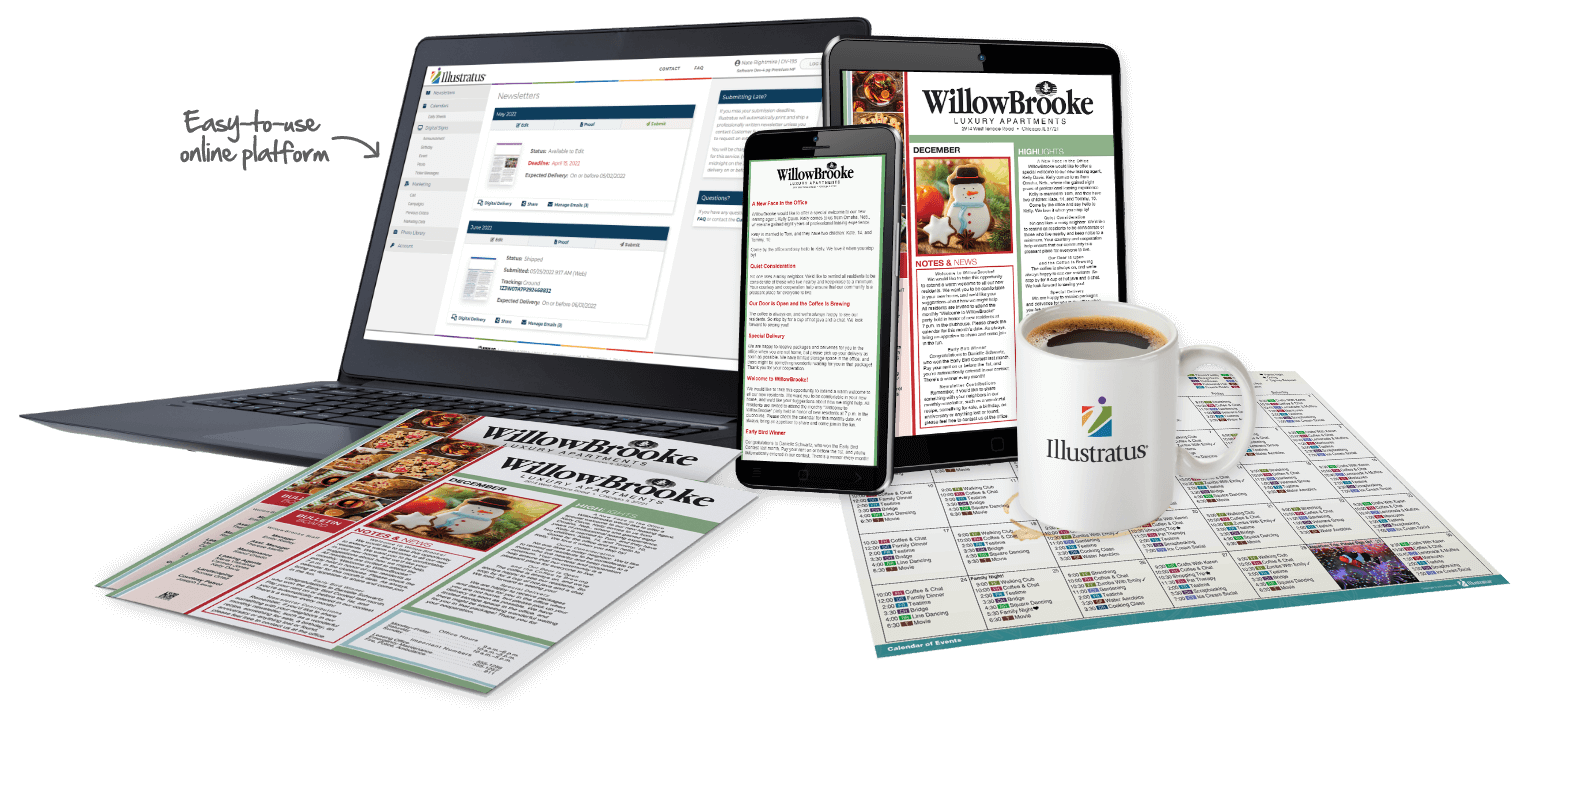 Editing software shown on screens with printed newsletters and calendar